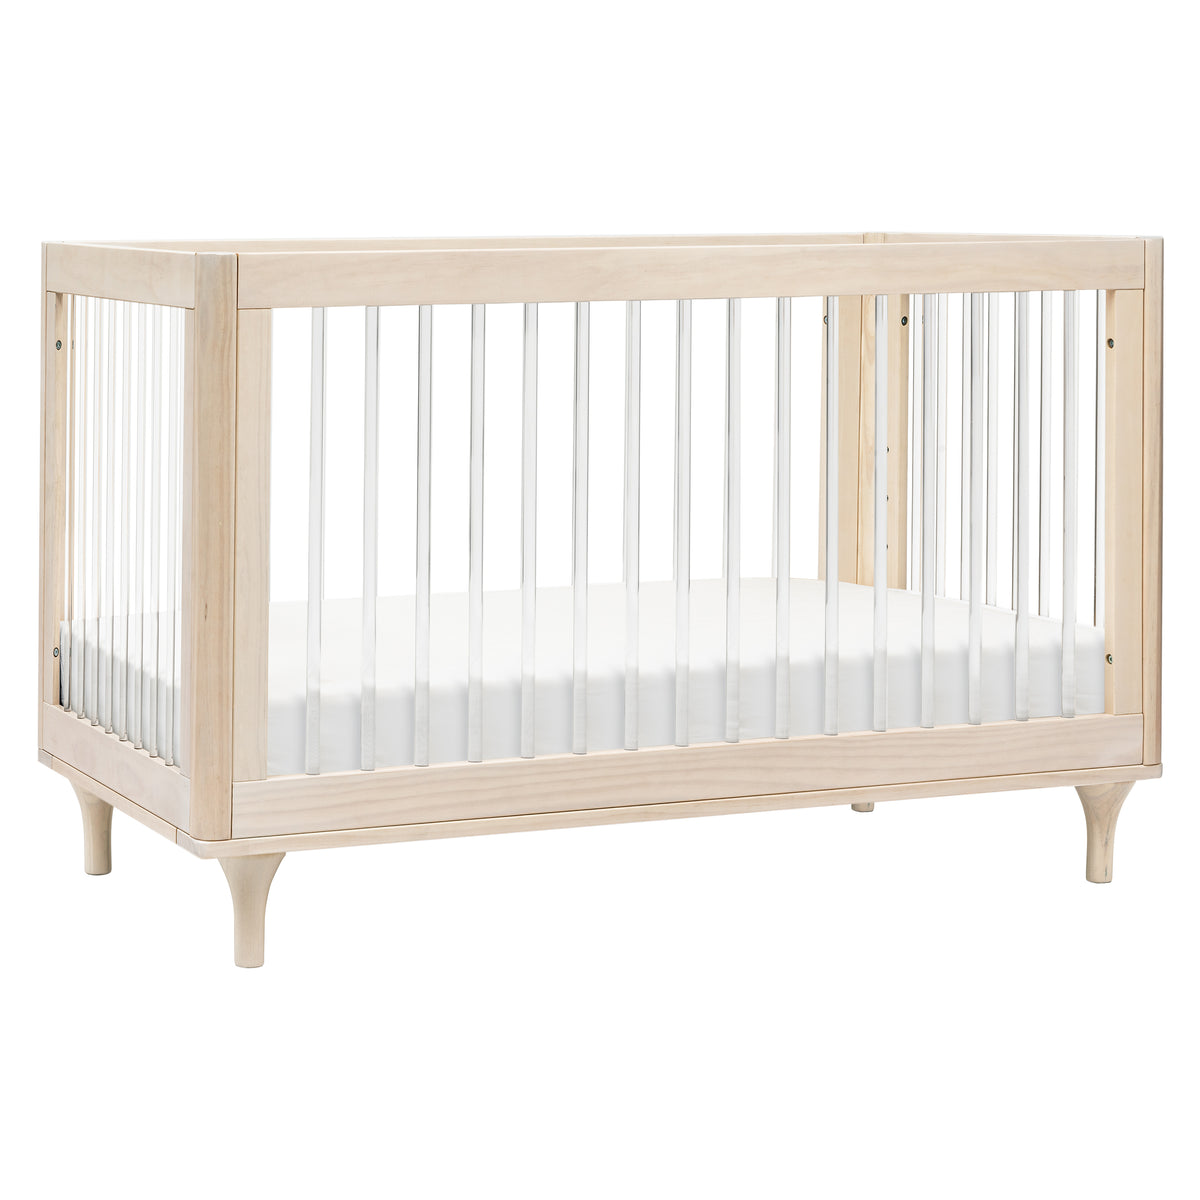 Lolly 3-in-1 Convertible Crib with Toddler Bed Conversion Kit - Washed Natural/Acrylic